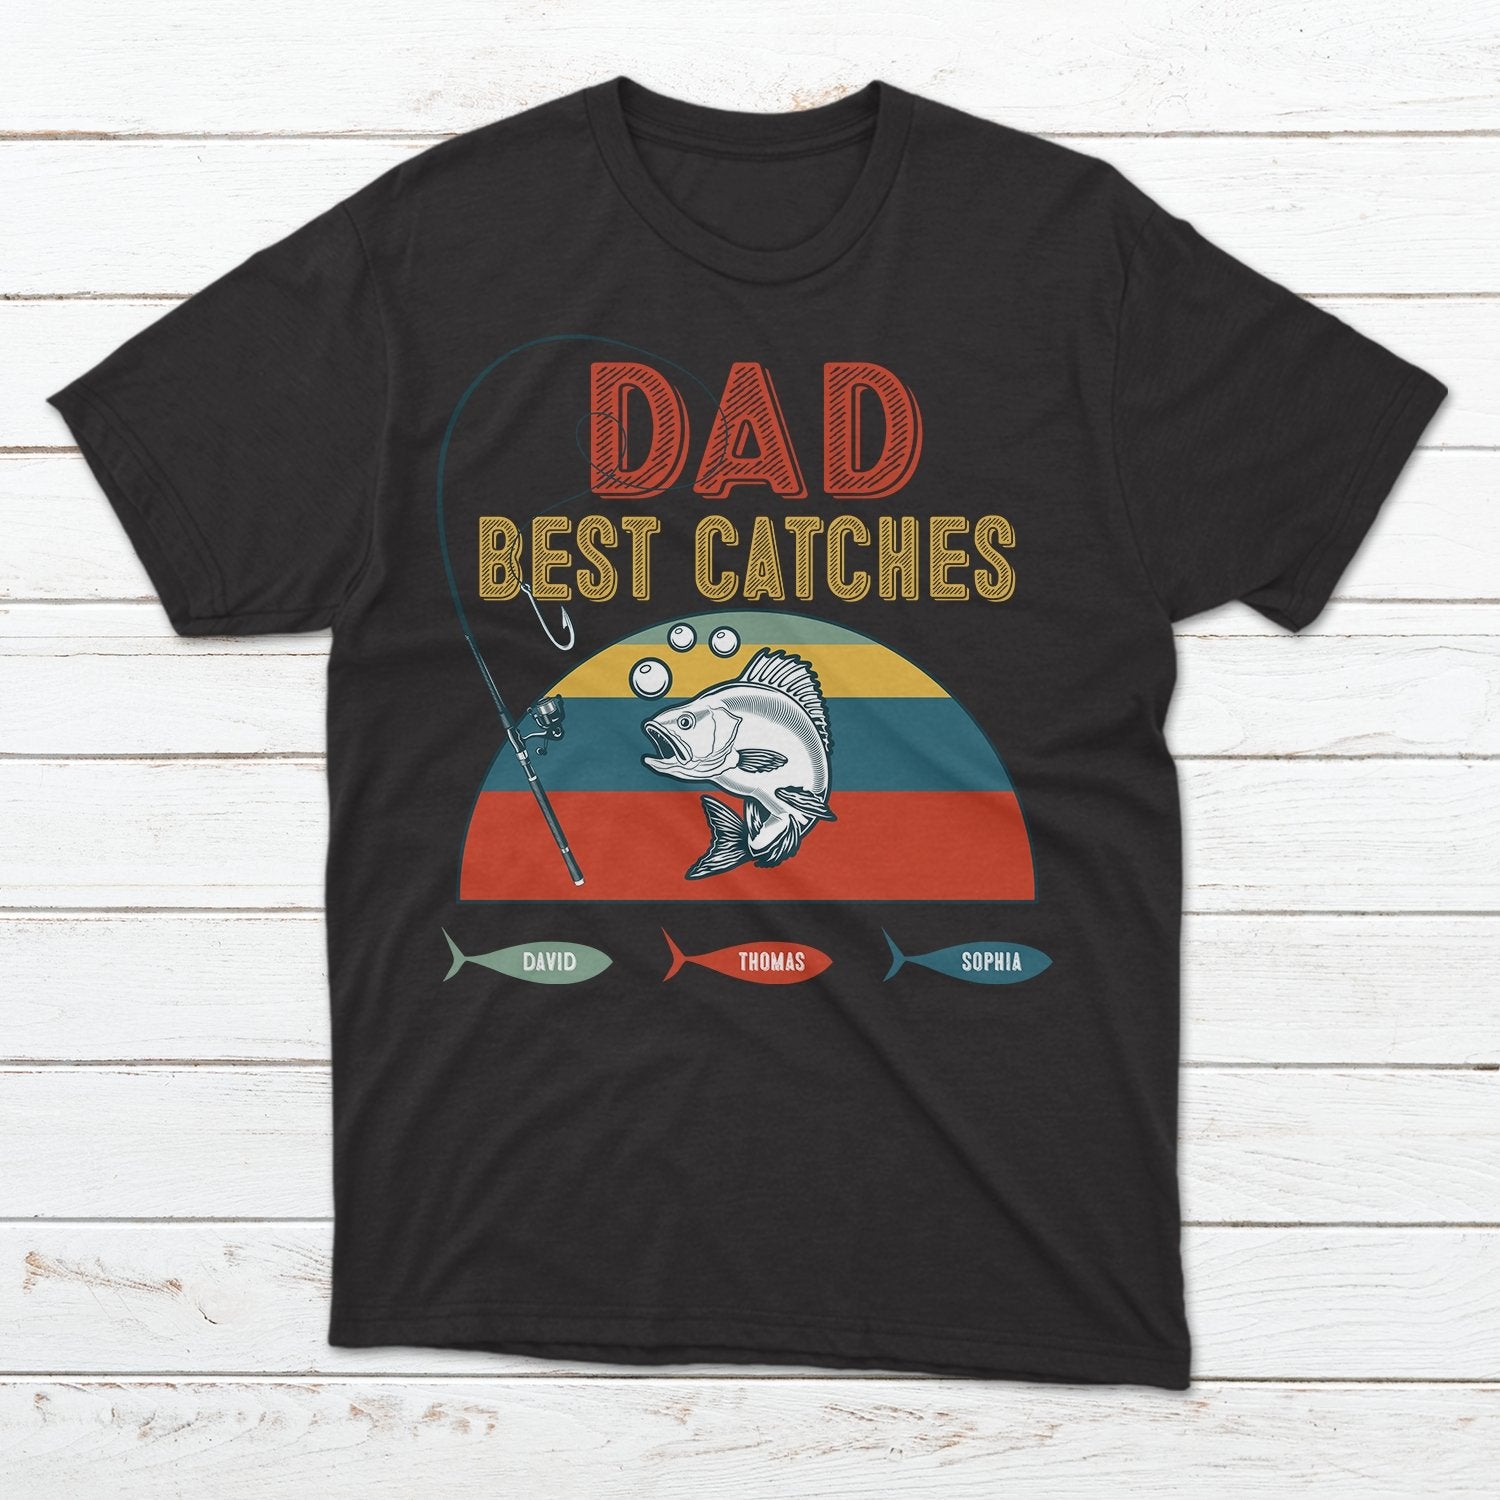 Dad Best Catches Personalized Shirt